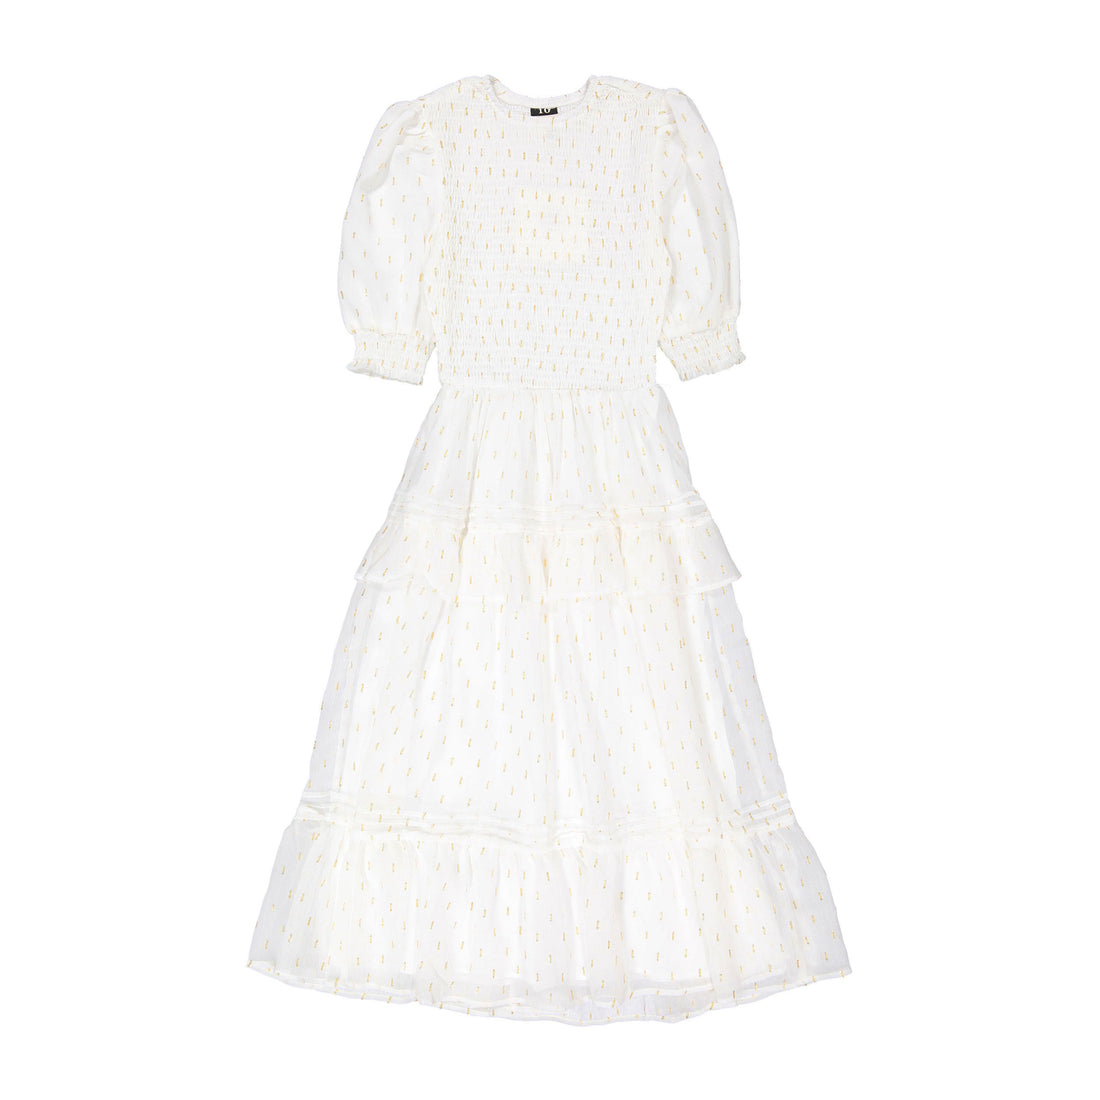 A4 White/ Gold Detailed Smocked Dress